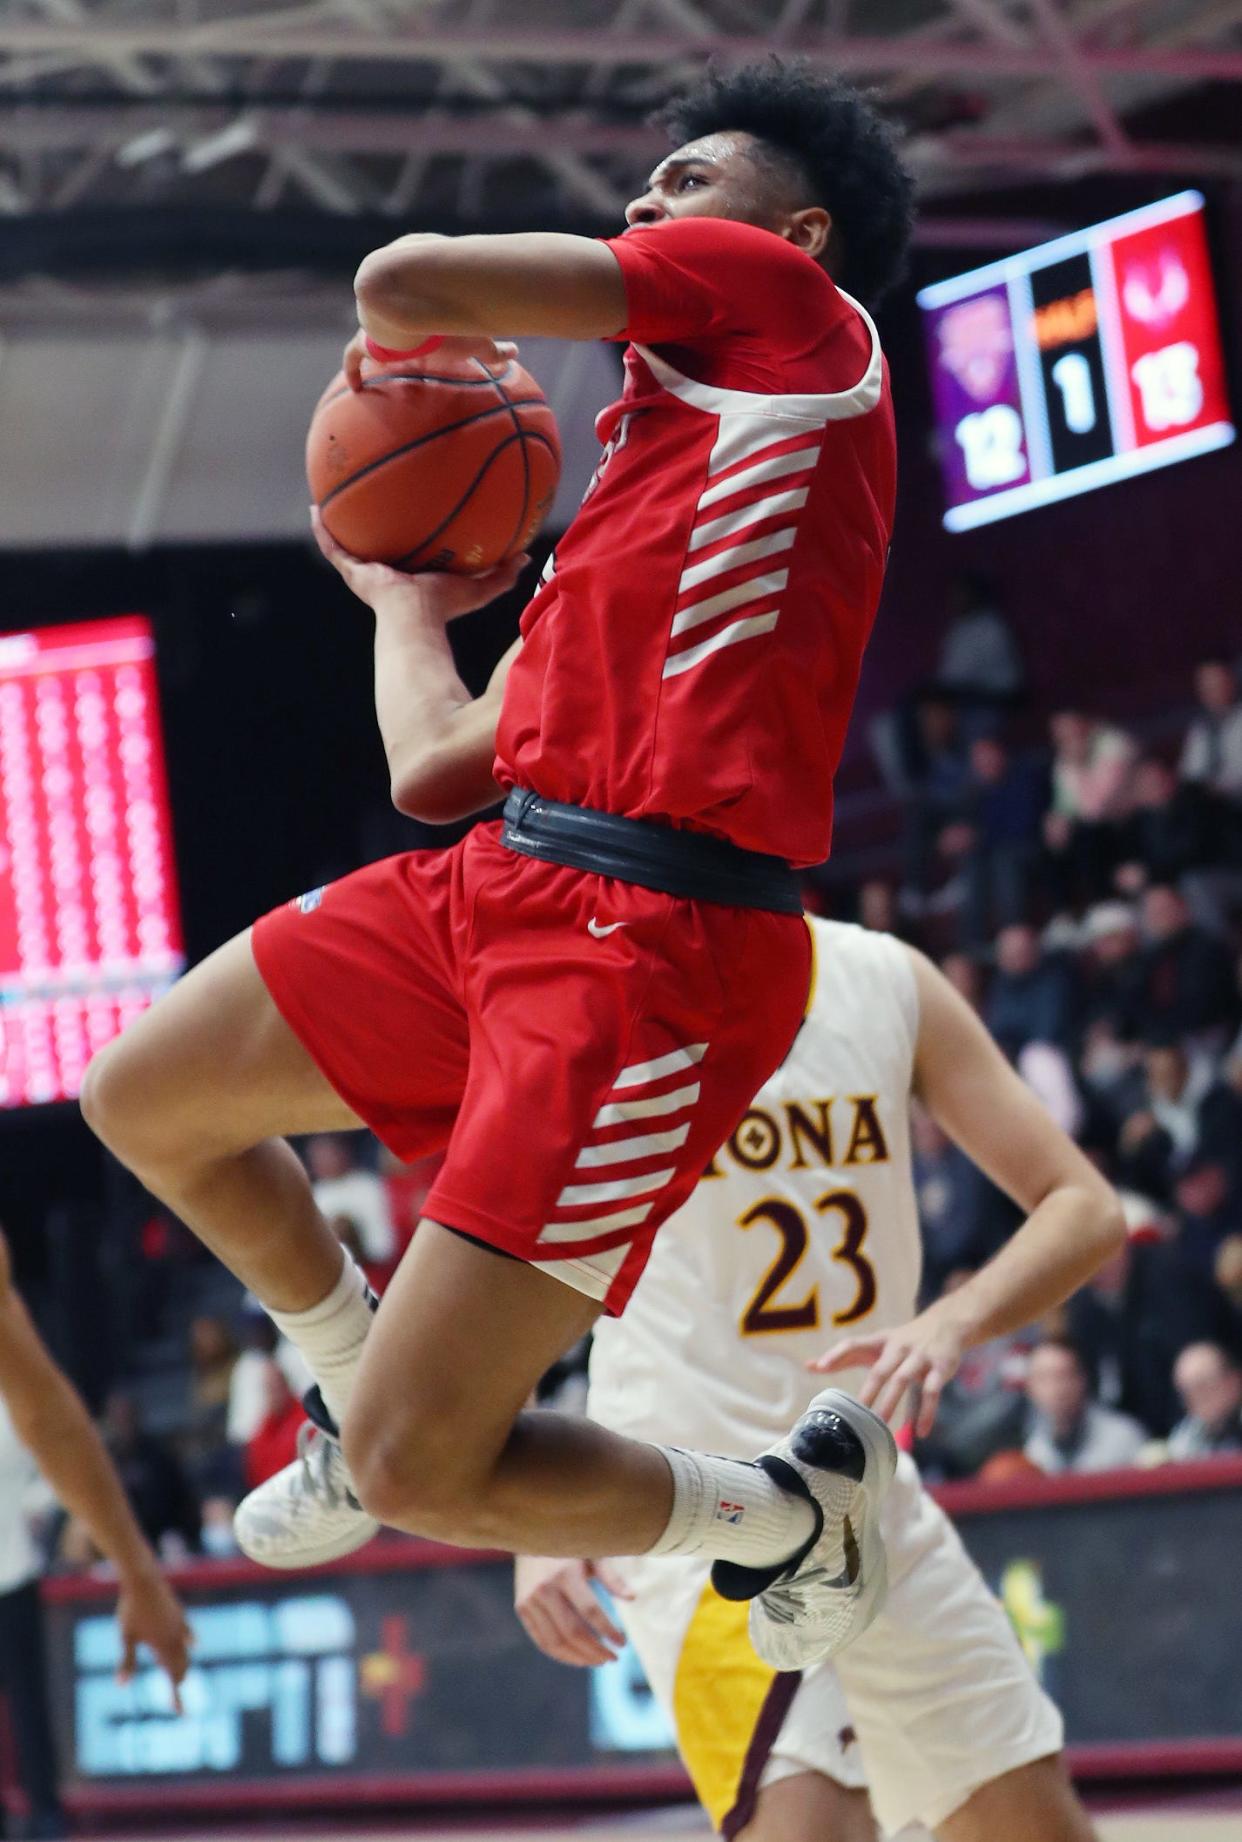 Marist's Jadin Collins (0) goes up for a shot in front of Iona's Dylan Saunders (23) during NCAA basketball action at Hynes Center at Iona University in New Rochelle Nov. 29, 2023.